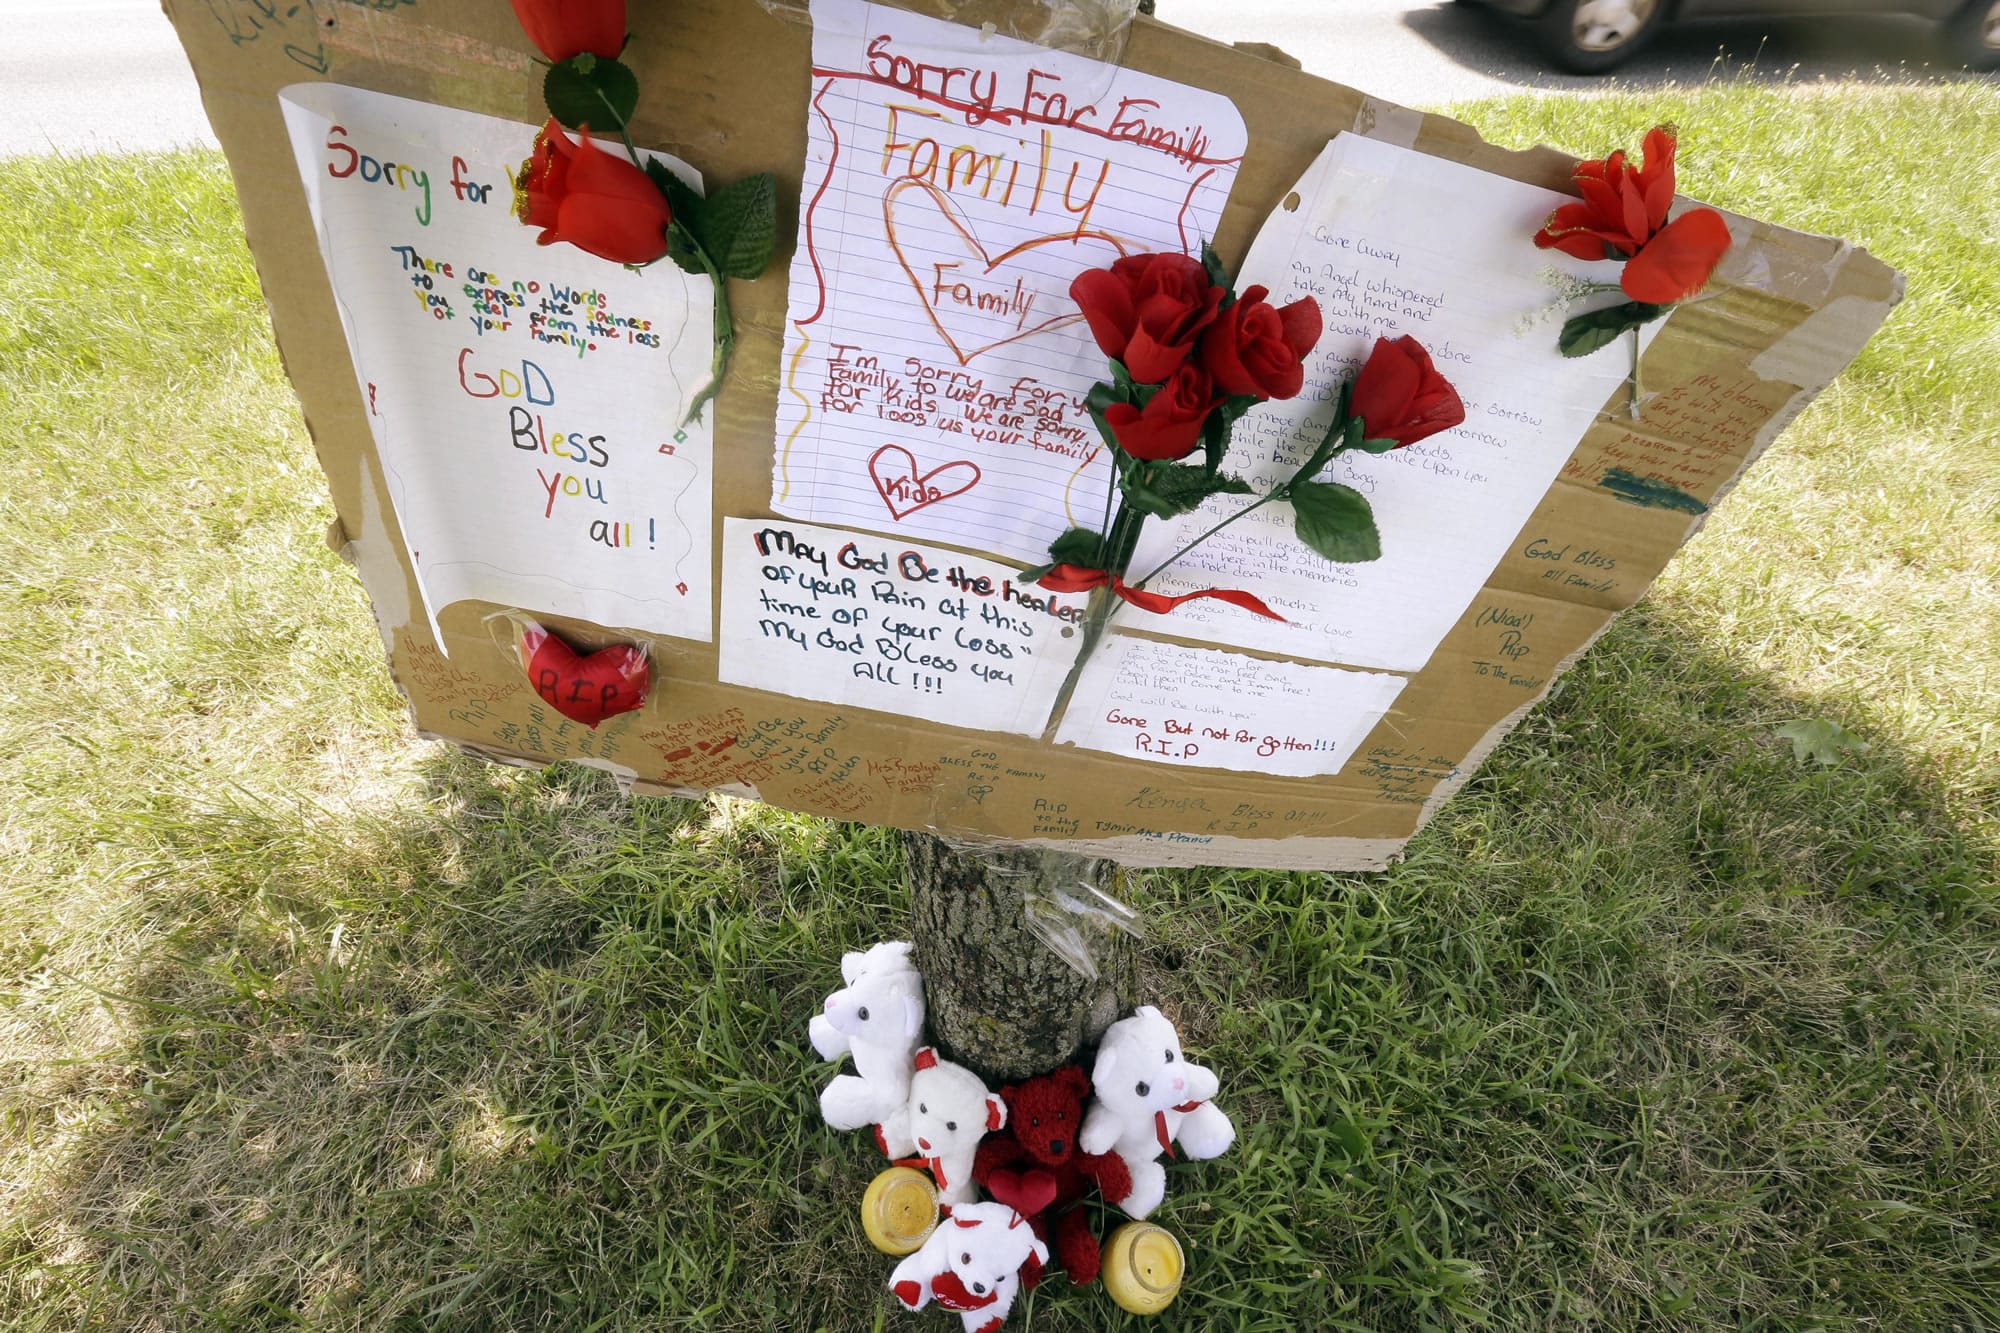 A makeshift memorial is shown near the location where a mother and three young sons were struck and killed while trying to cross a busy highway after dark Wednesday in Philadelphia.